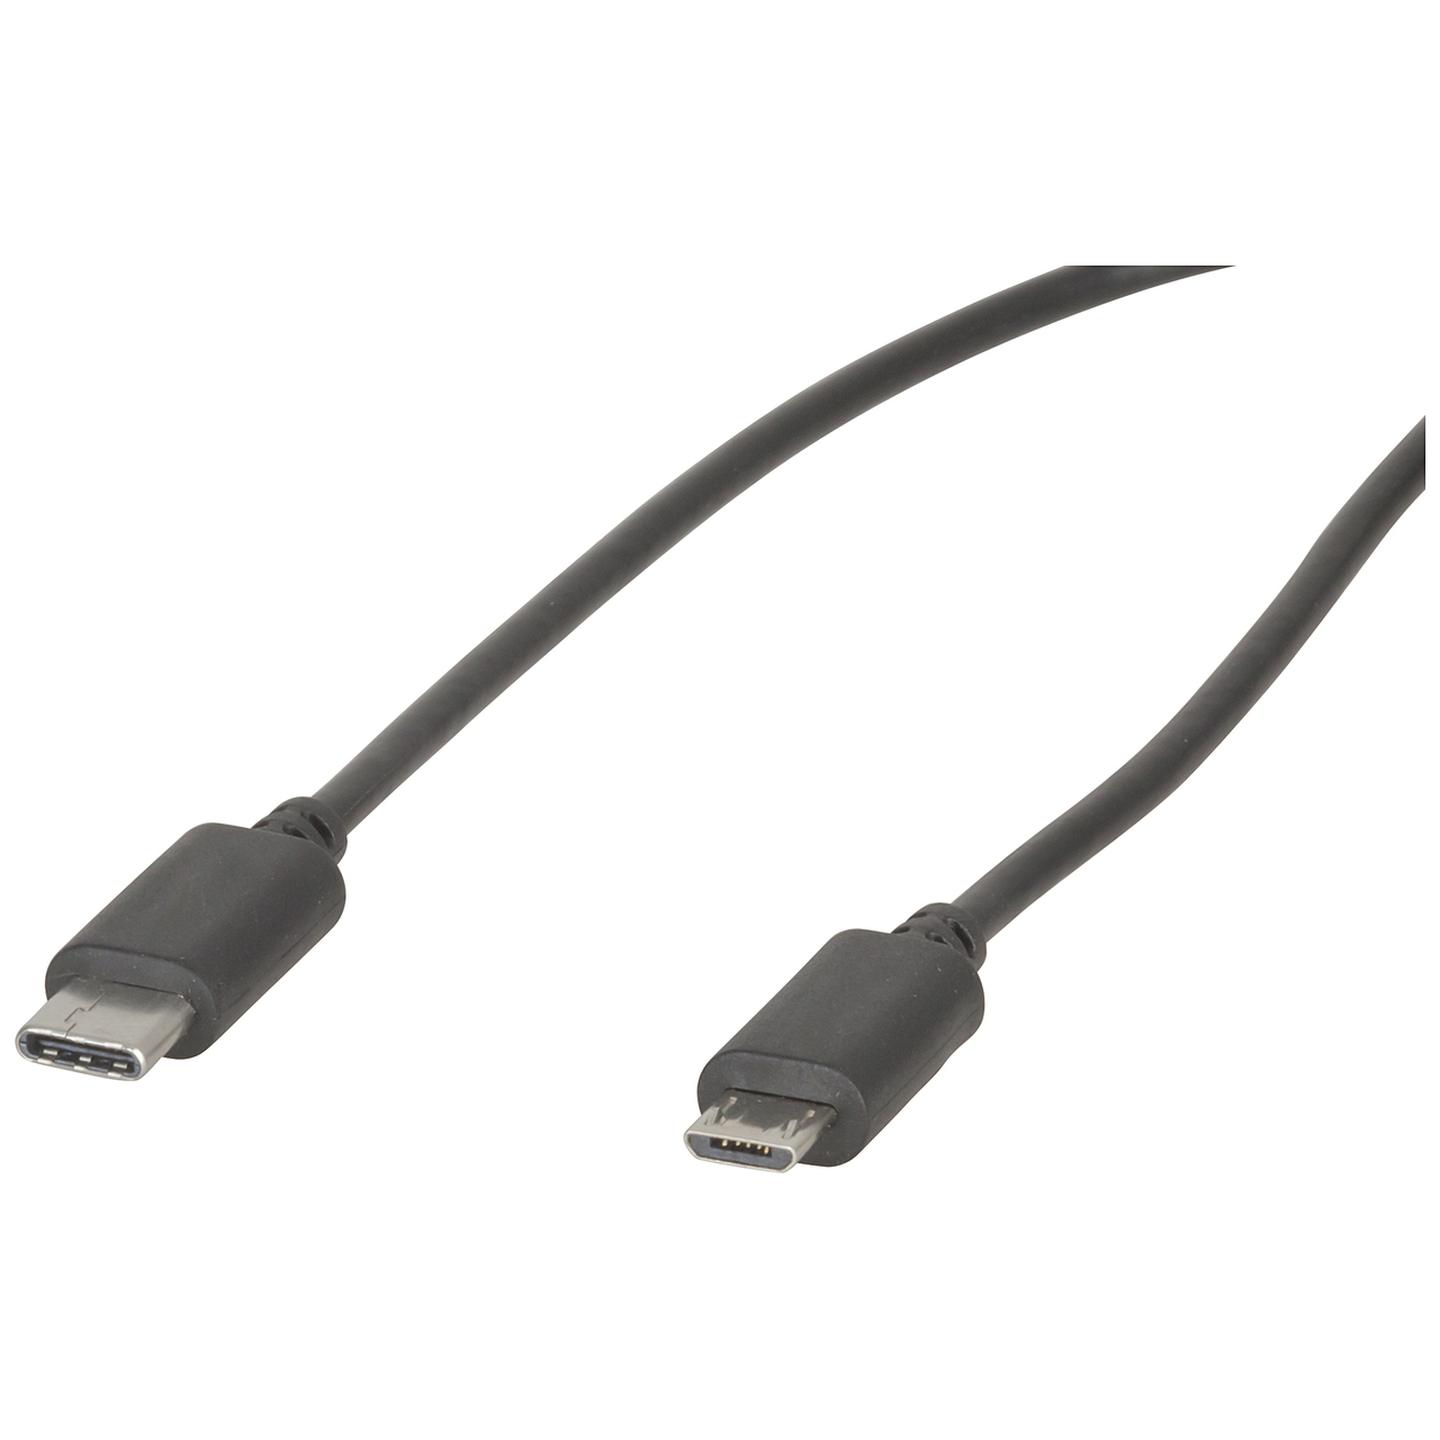 USB Type C to USB 2.0 Micro B Cable 1.8m